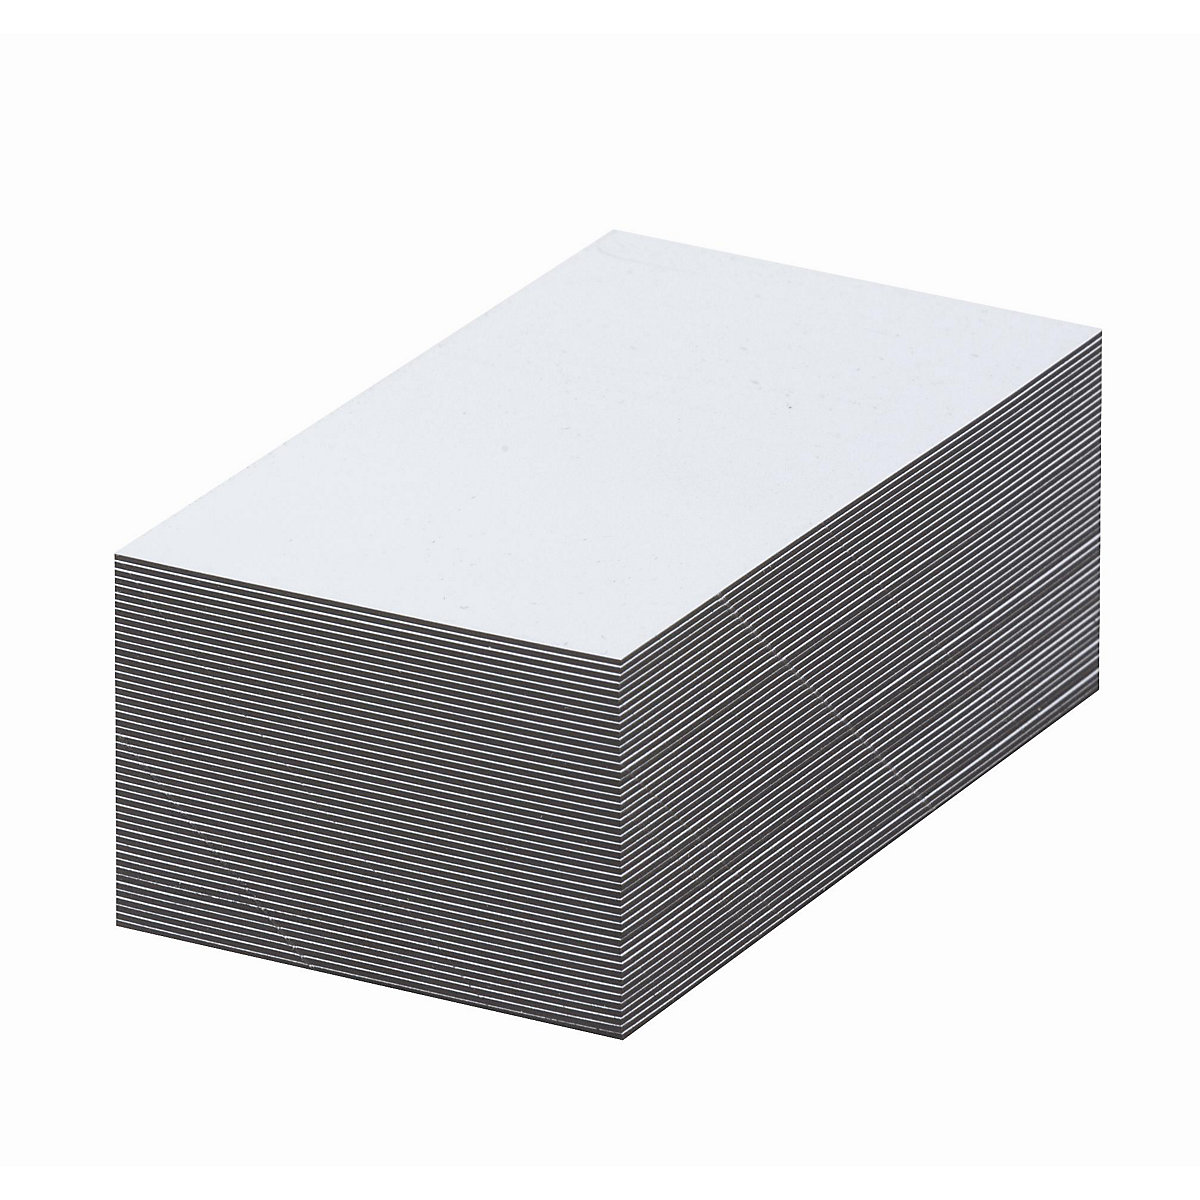 Magnetic storage labels, white, HxW 30 x 100 mm, pack of 100-16